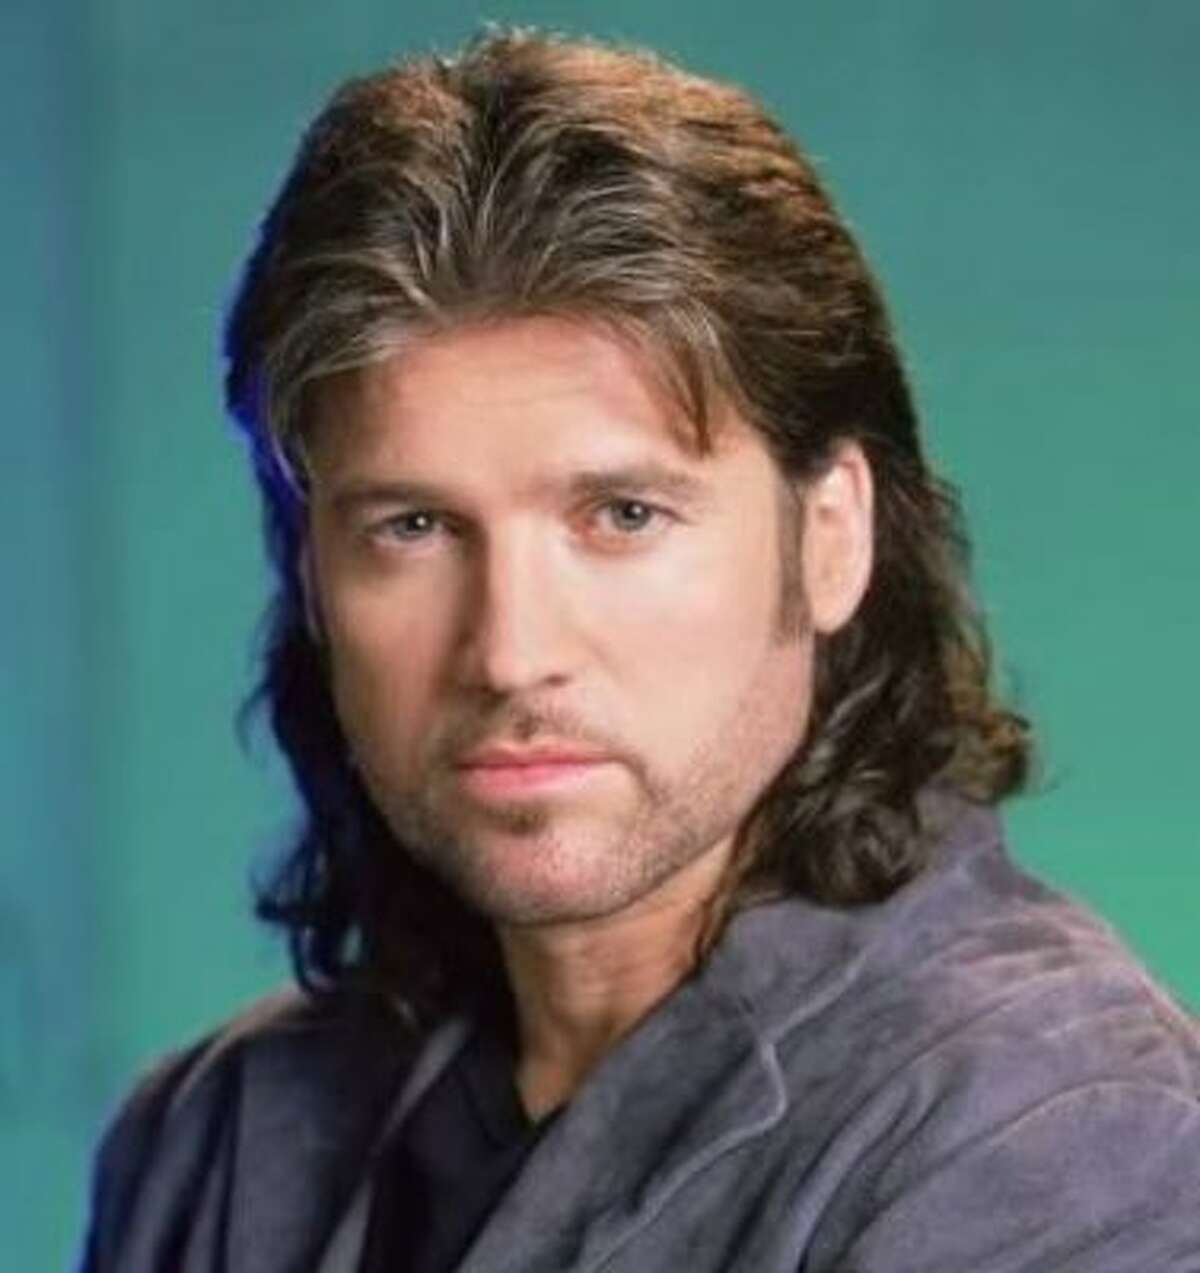 8 facts about Billy Ray Cyrus